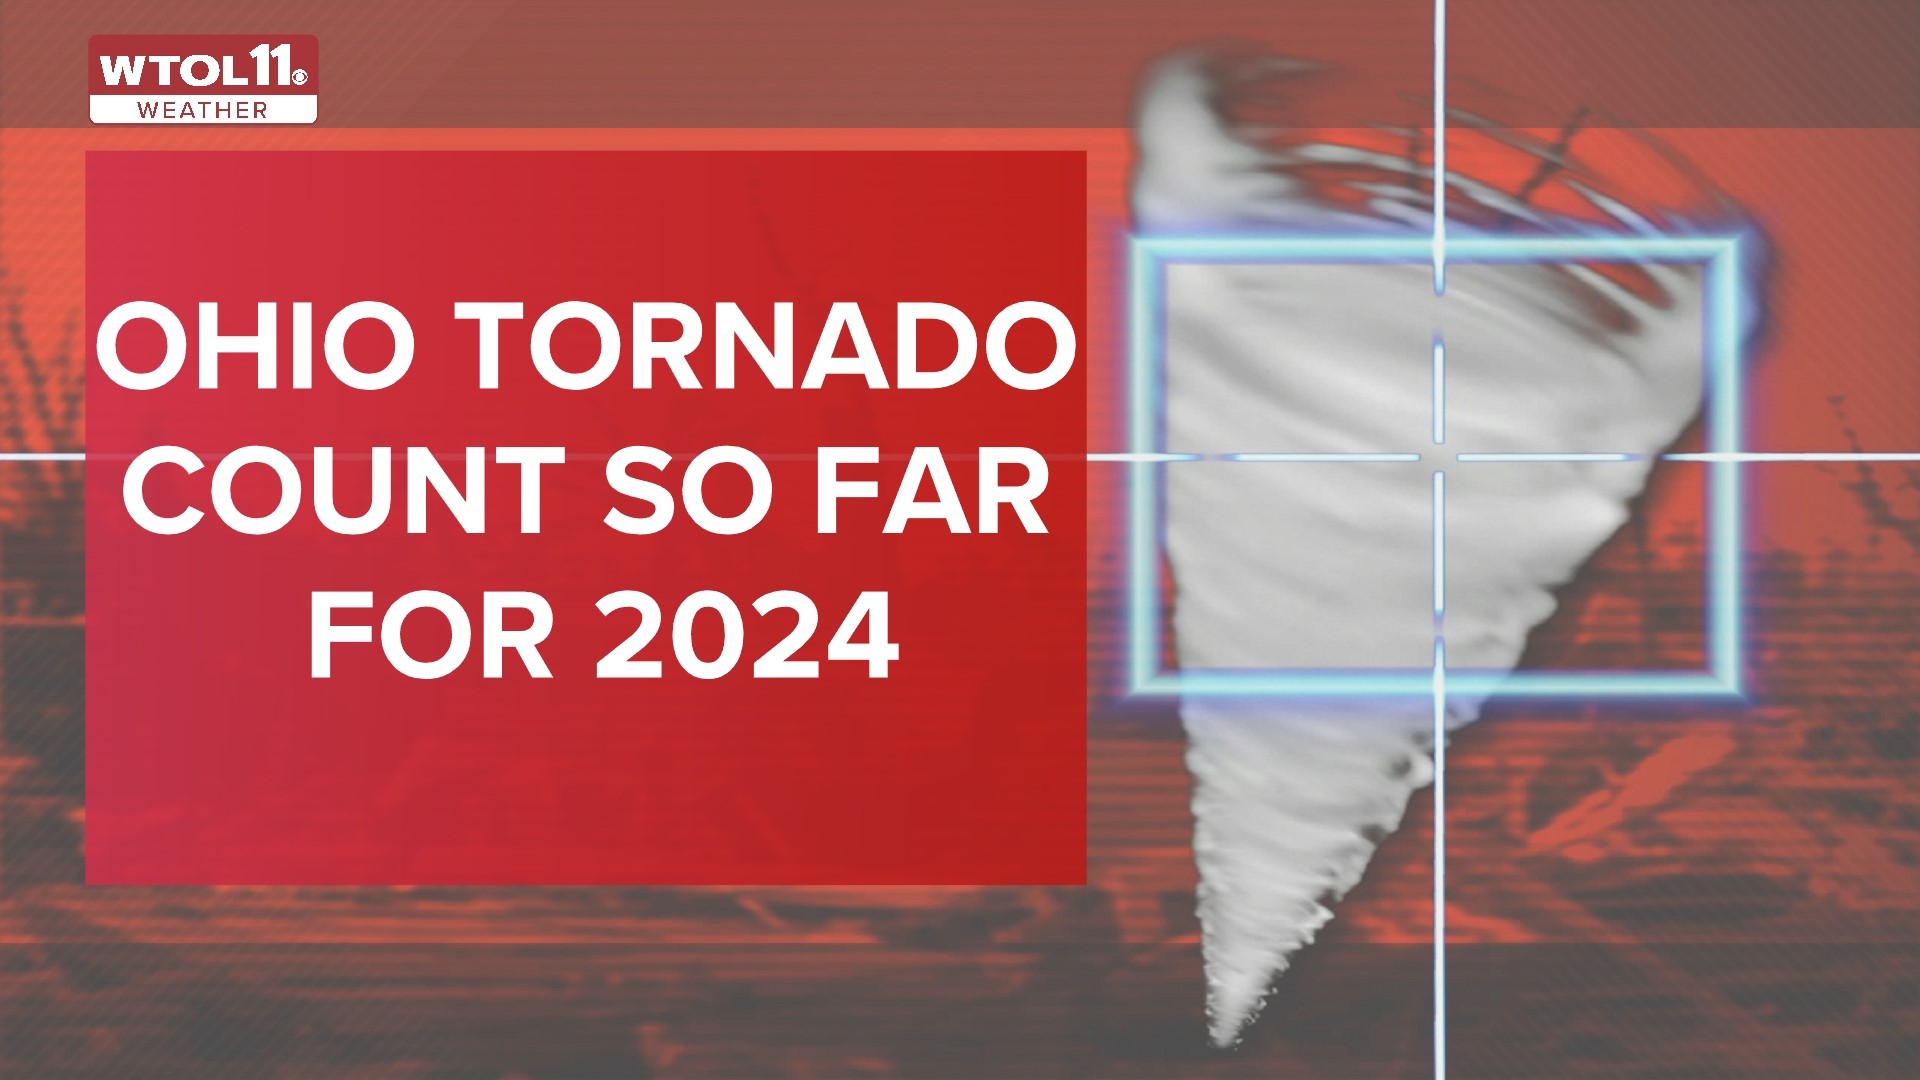 With 63 tornadoes, Ohio has officially broken its record for most tornadoes in a single year. Until June 28, 2024, the previous record was 62 tornadoes in 1992.